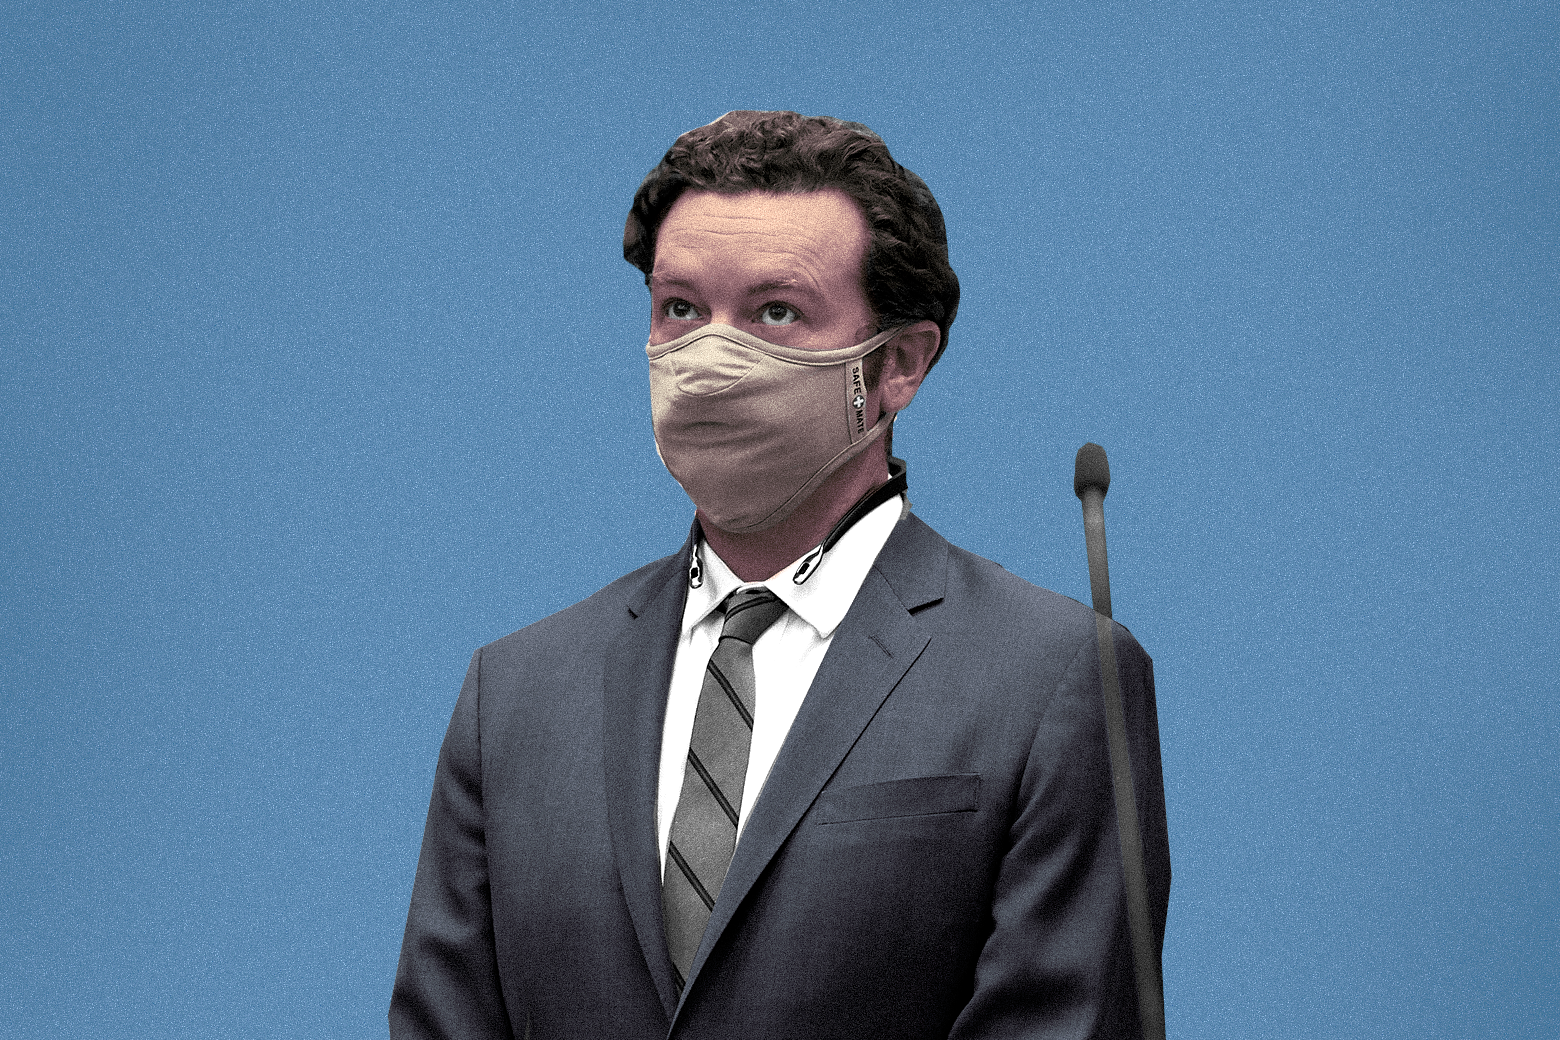 Danny Masterson in a mask at the trial.